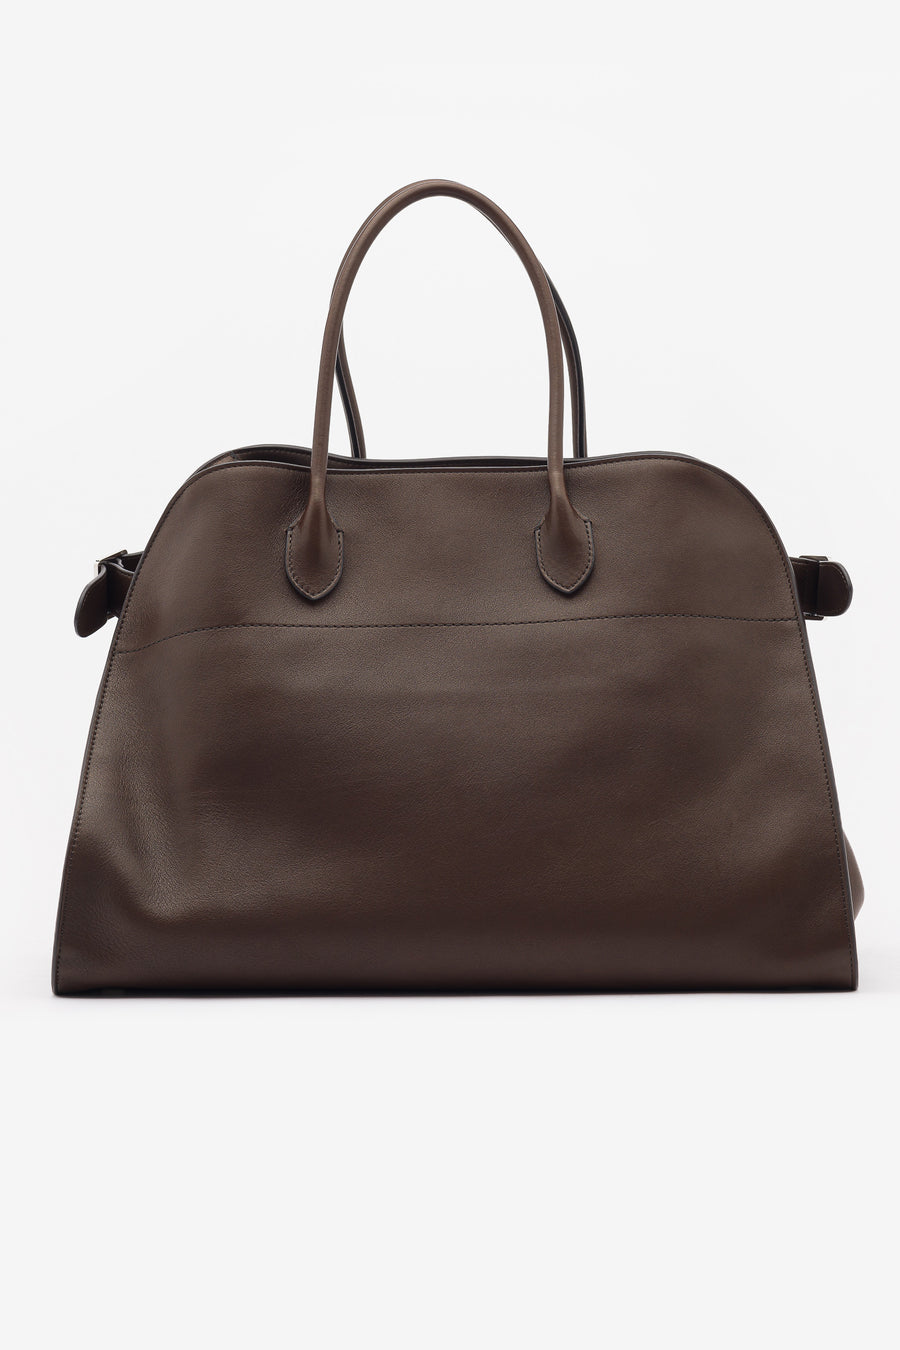 Soft Margaux 17 Bag in Deep Brown by The Row - Notre